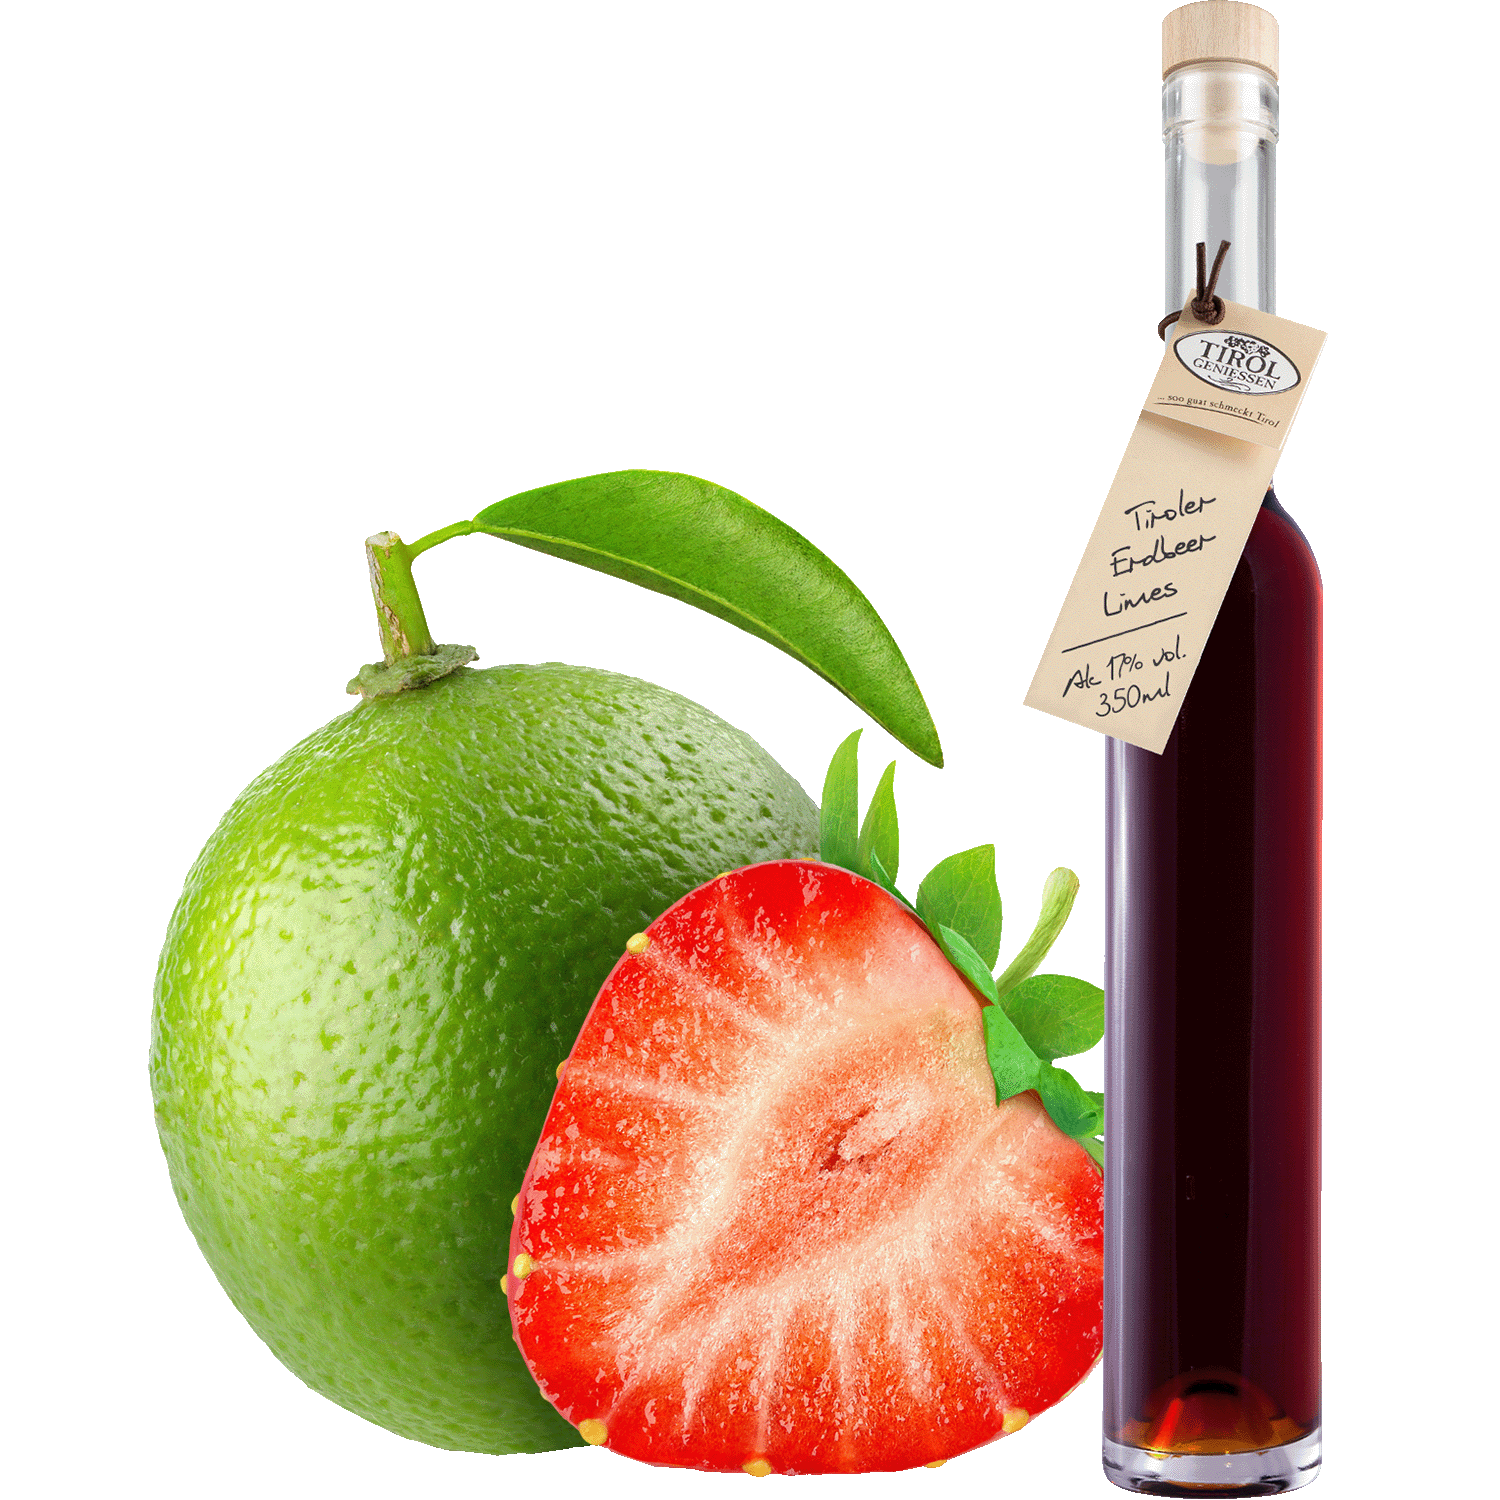 Strawberry Lime Liqueur in gift bottle from Austria from Tirol Geniessen